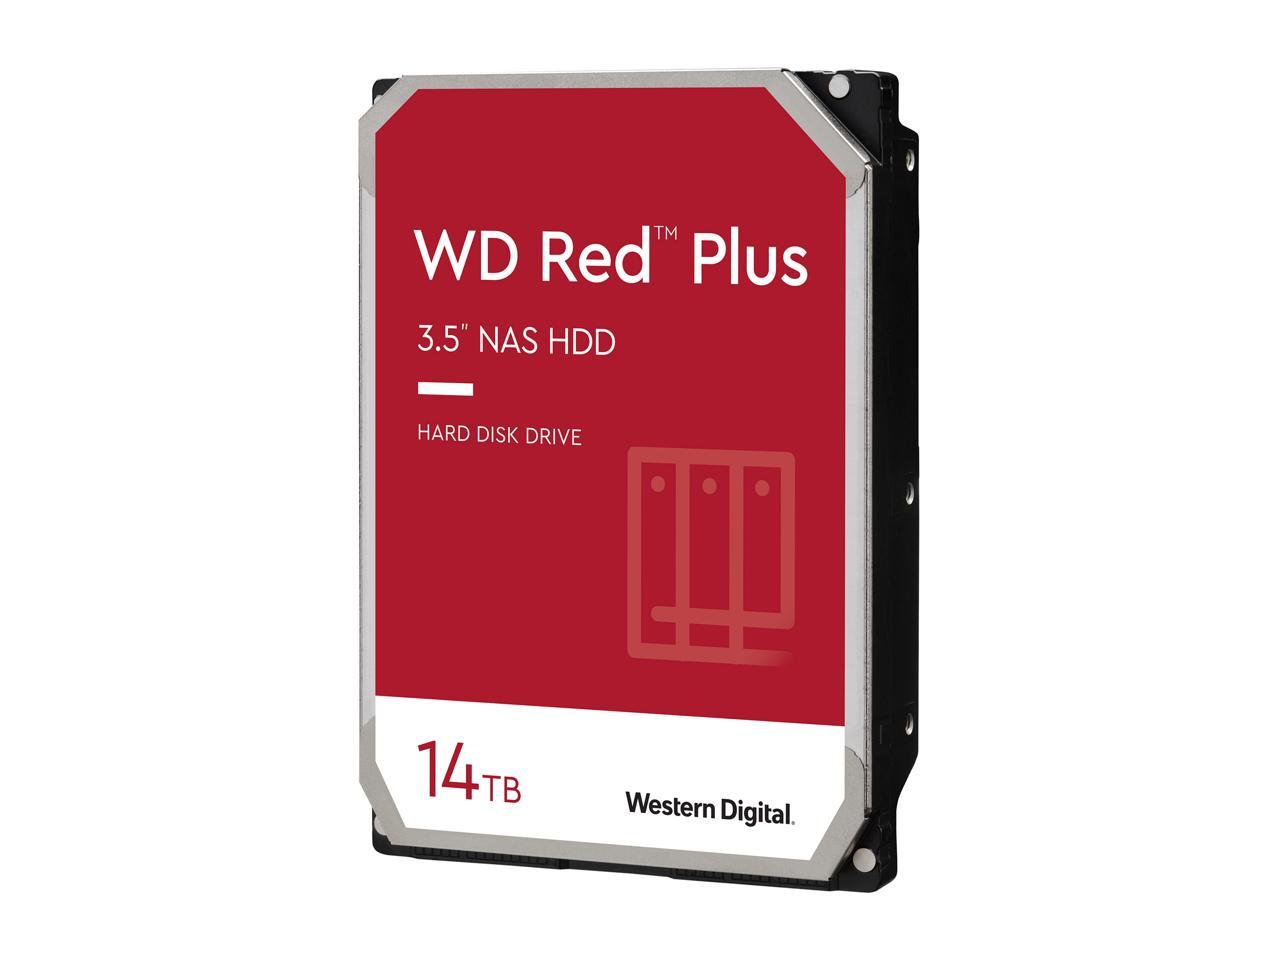 Wd Red Plus 14Tb Nas Hard Disk Drive - 7200 Rpm Class Sata 6Gb/S, Cmr, 512Mb Cache, 3.5 Inch - Wd140Efgx